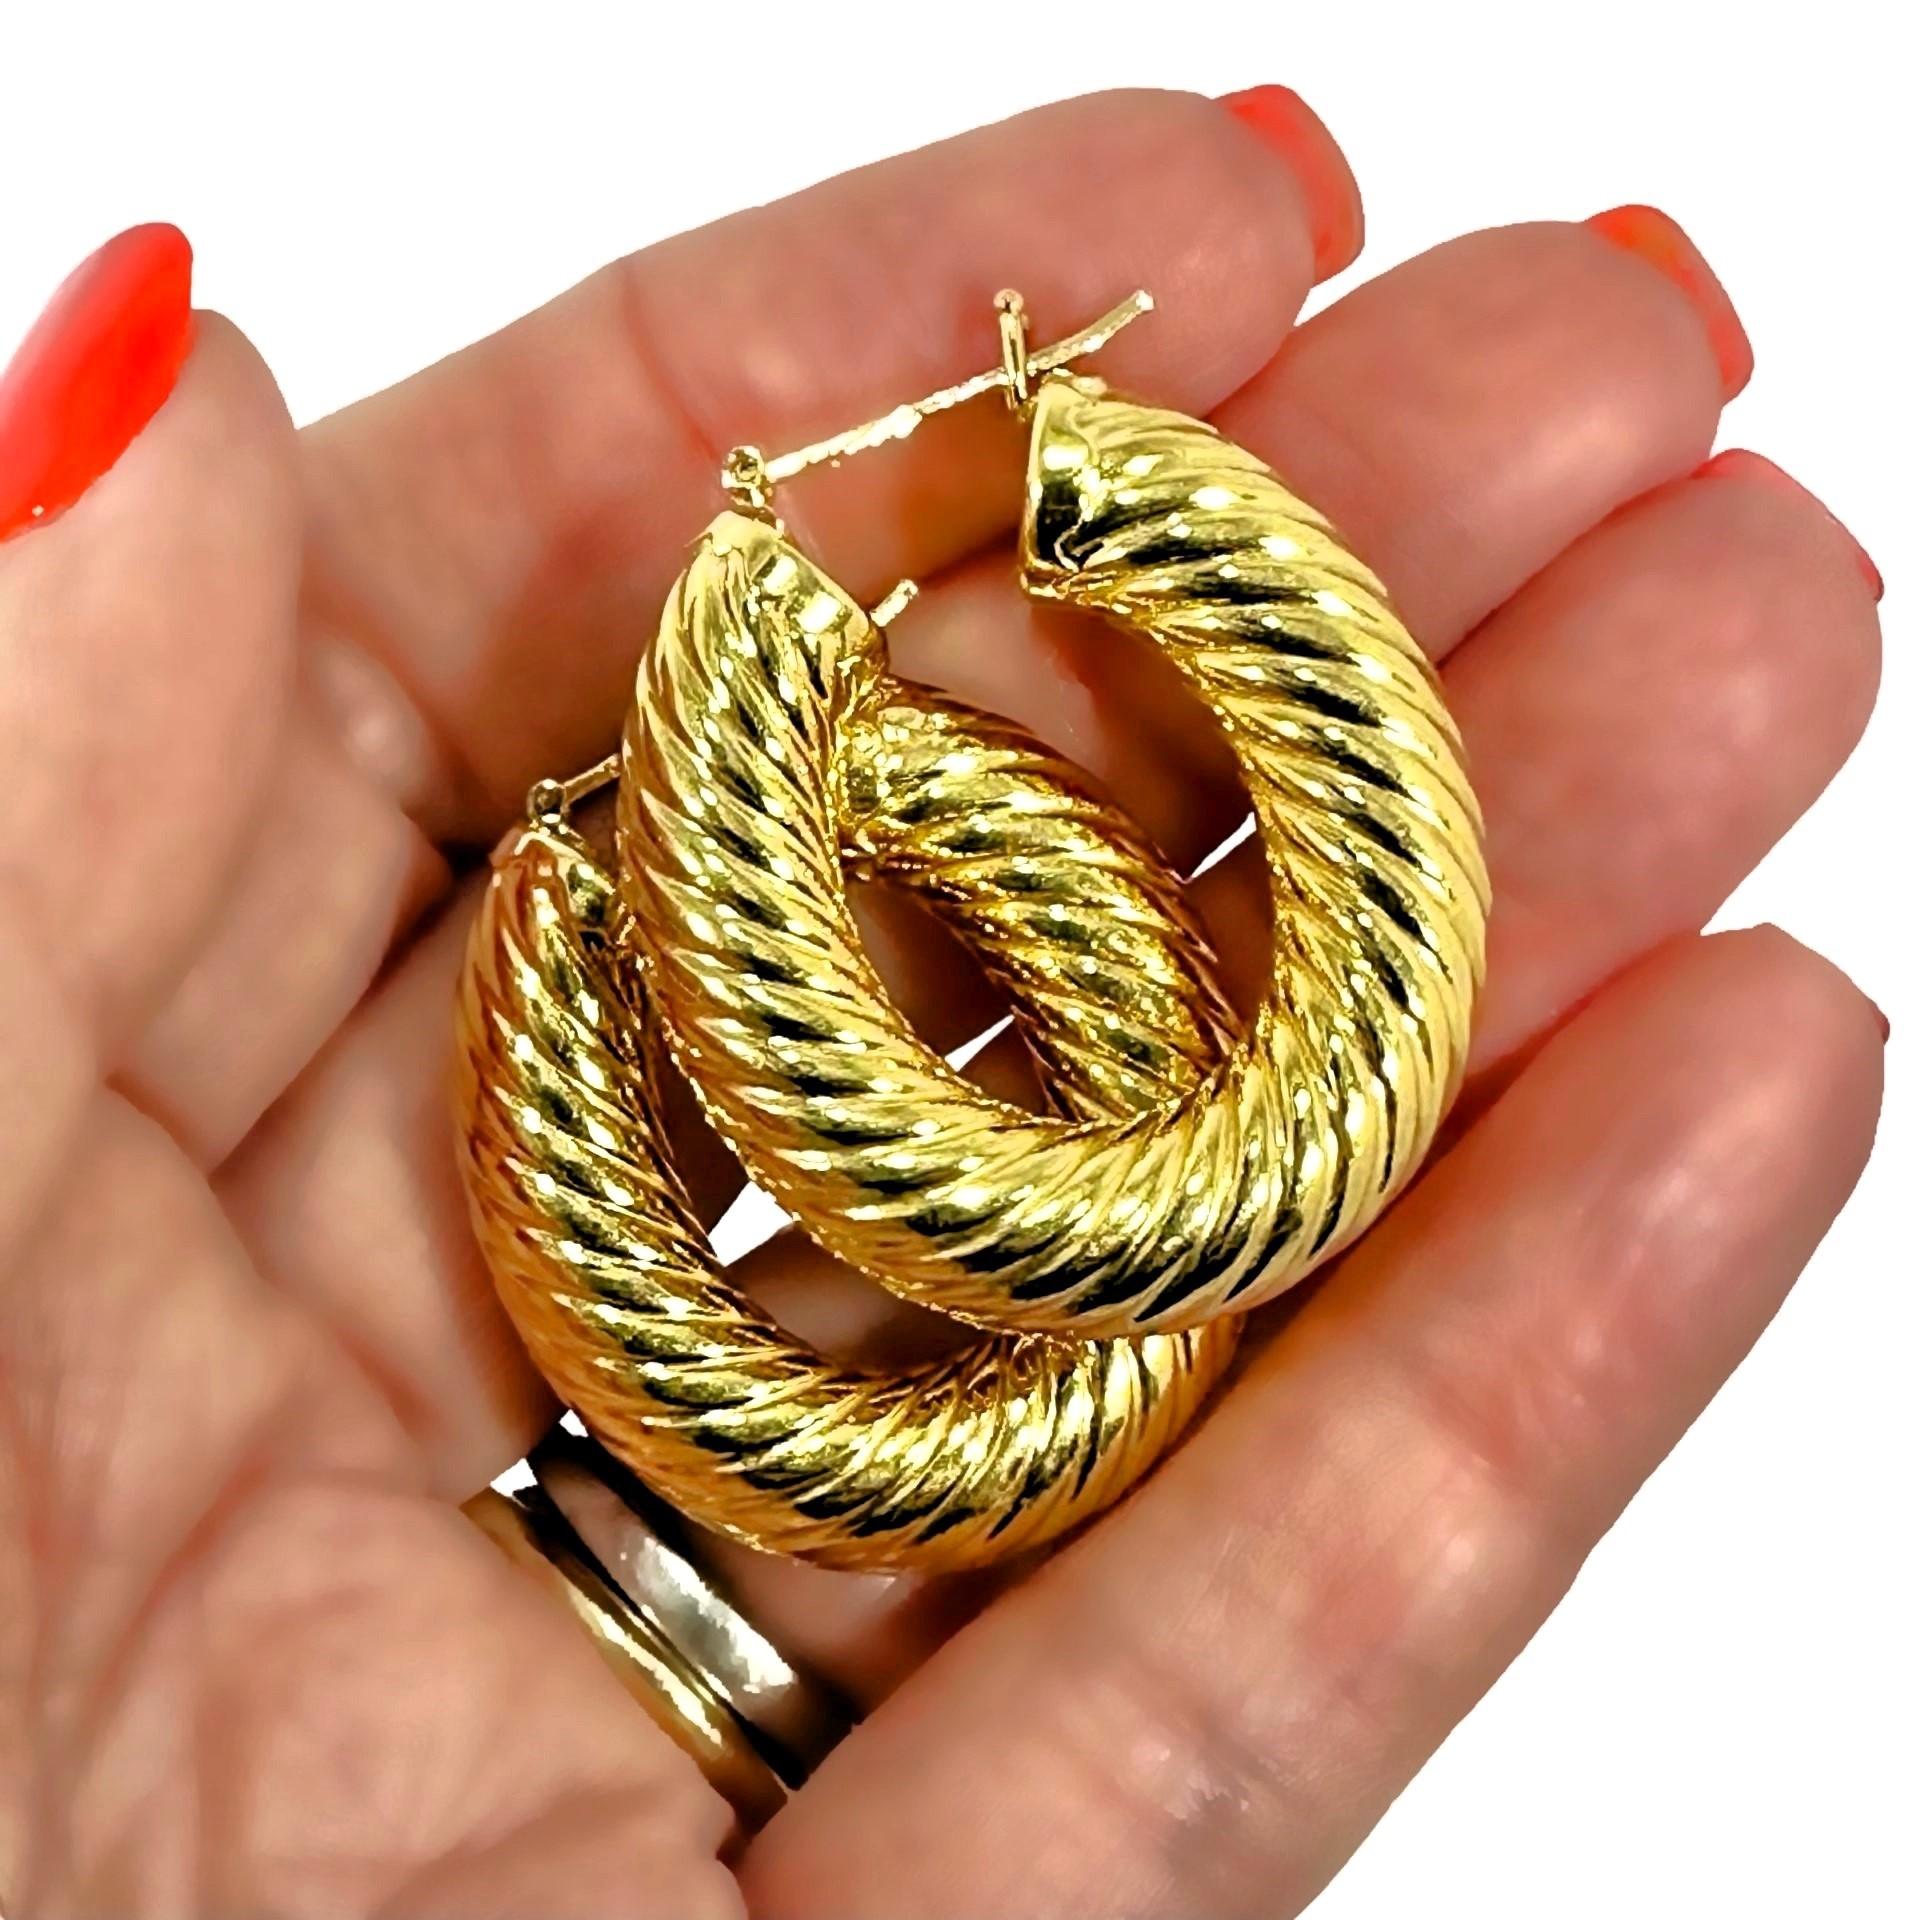 Italian 18K Yellow Gold Twisted Hoop Earrings 1.25 Inches Long x 1/4 Inch Thick For Sale 4